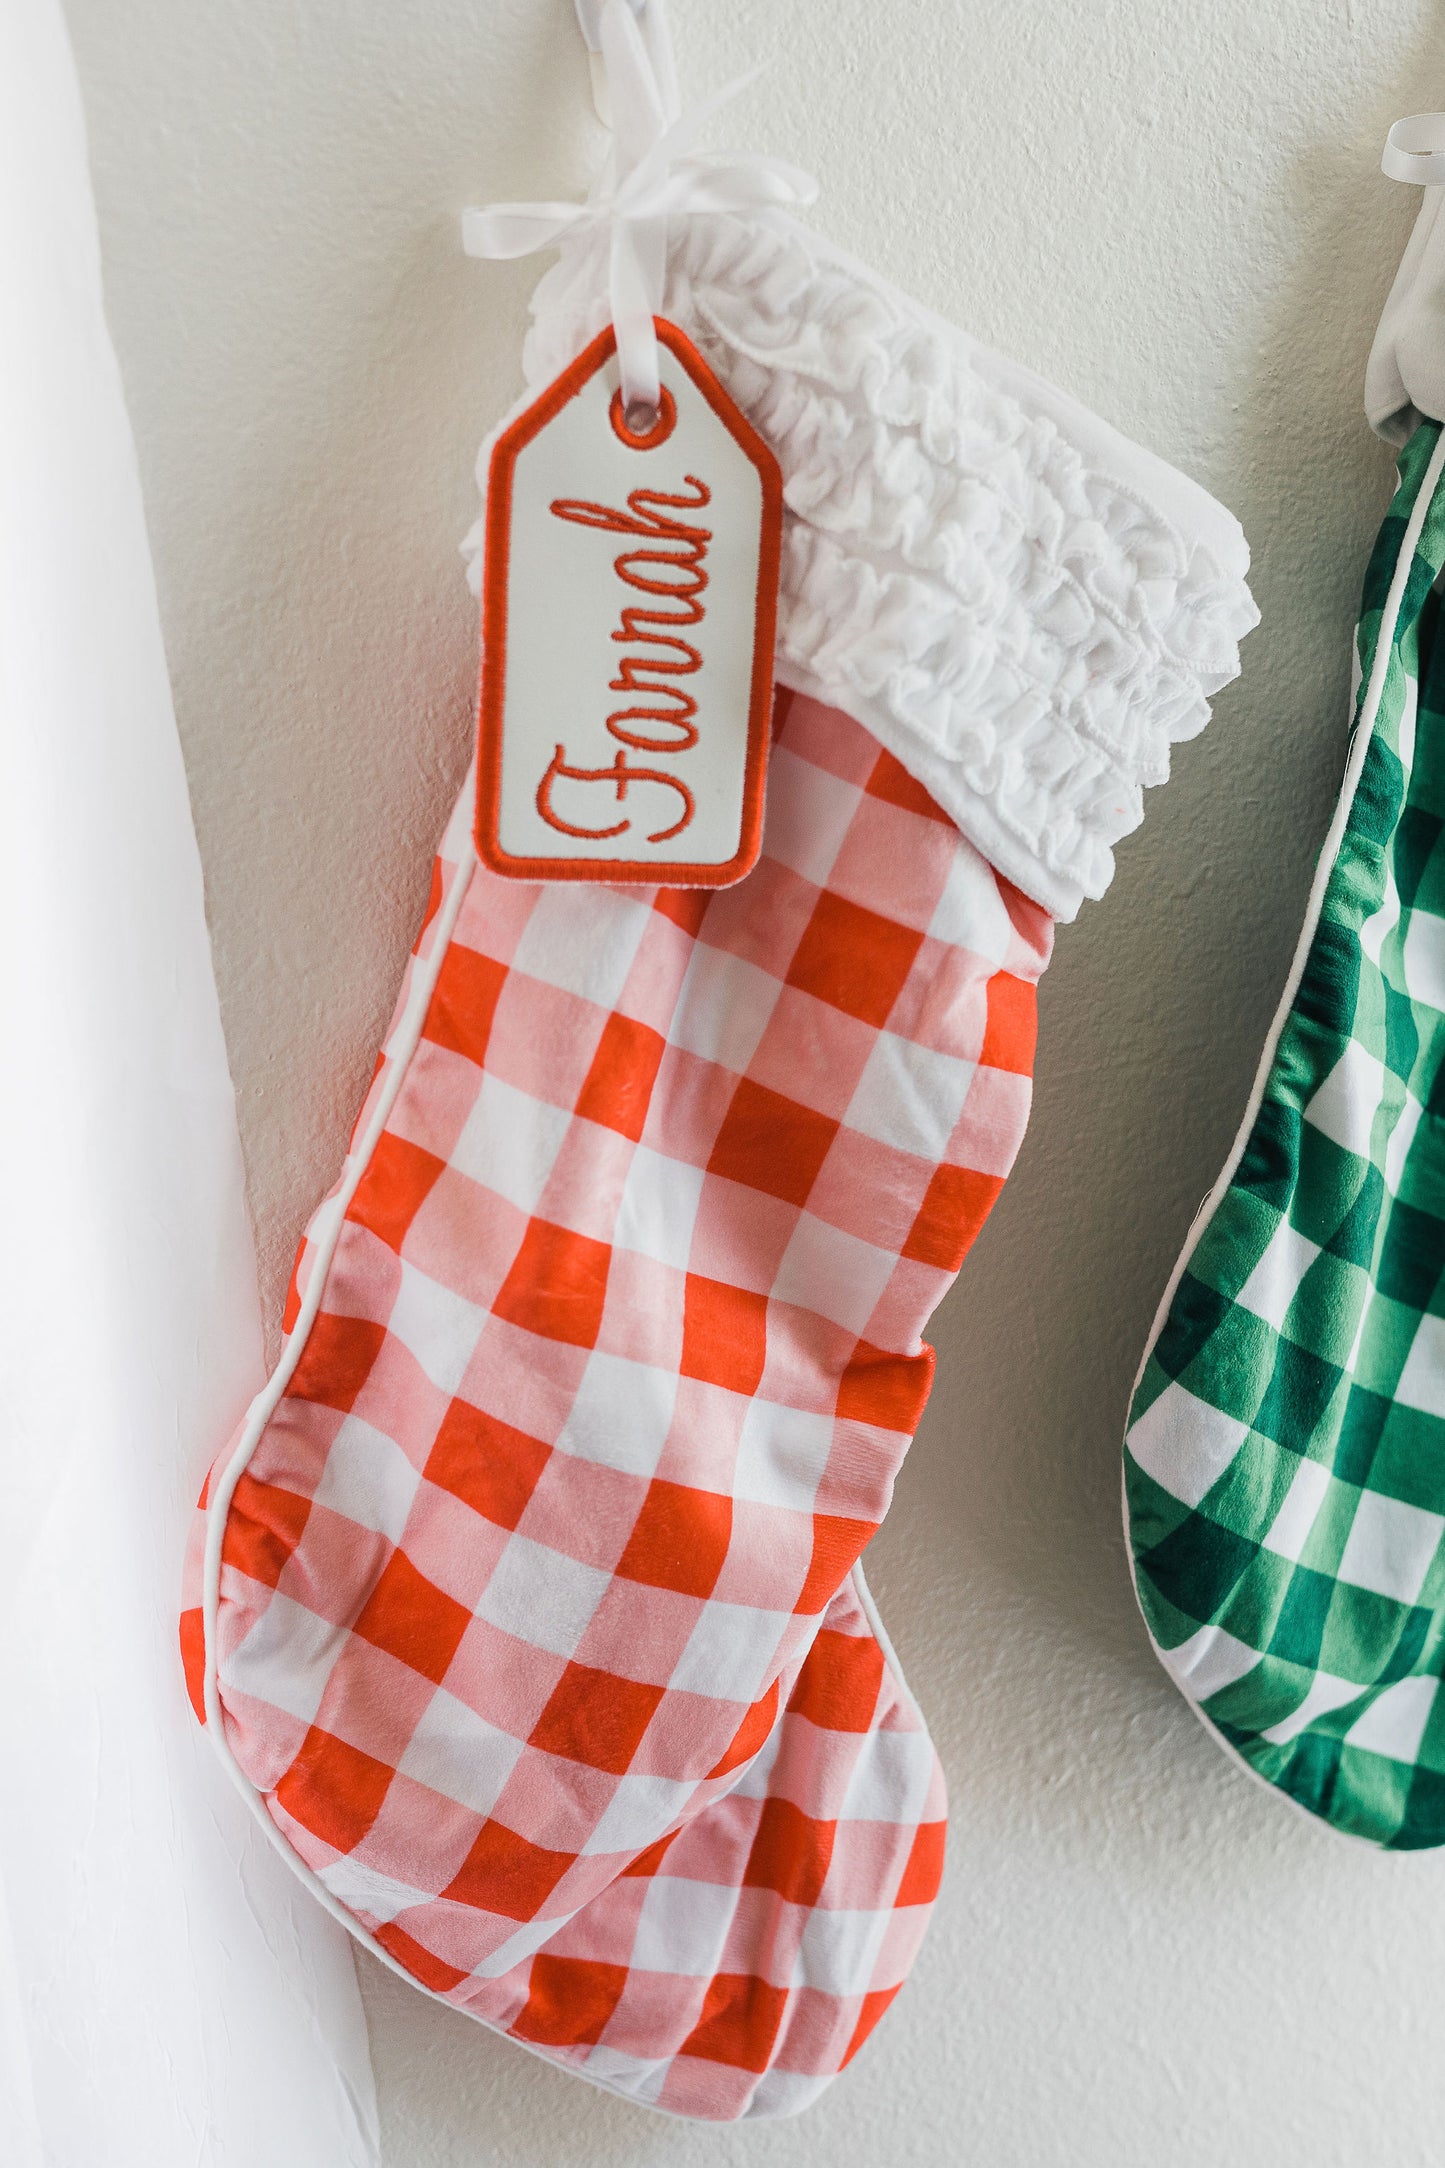 Christmas Stocking - Red Gingham